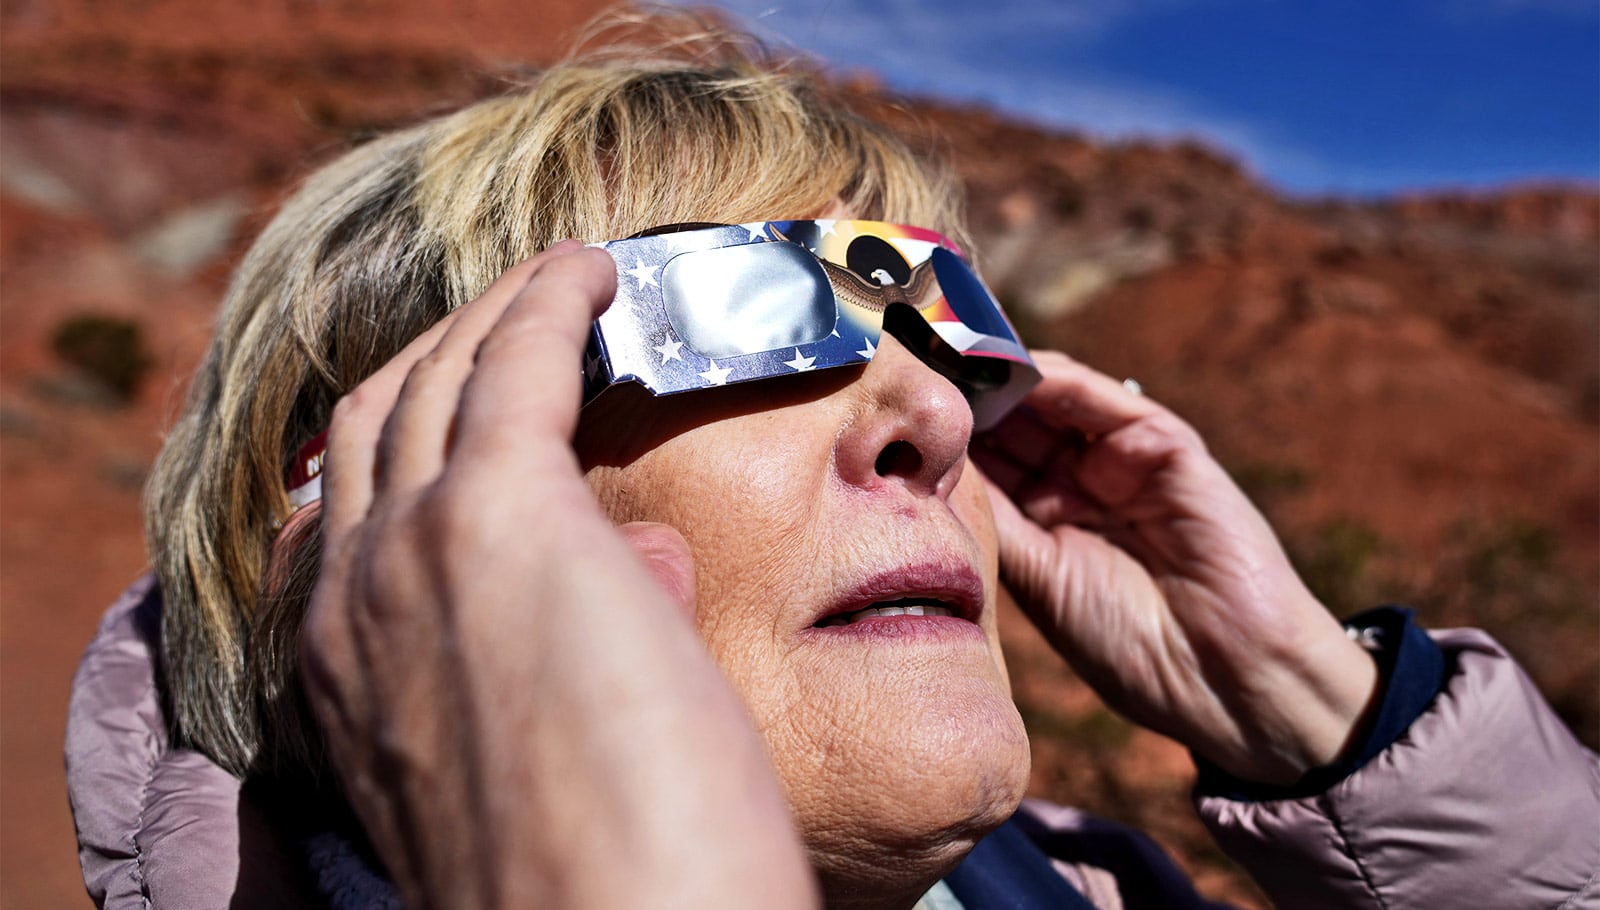 What is the scientific explanation for the safety of solar eclipse glasses?